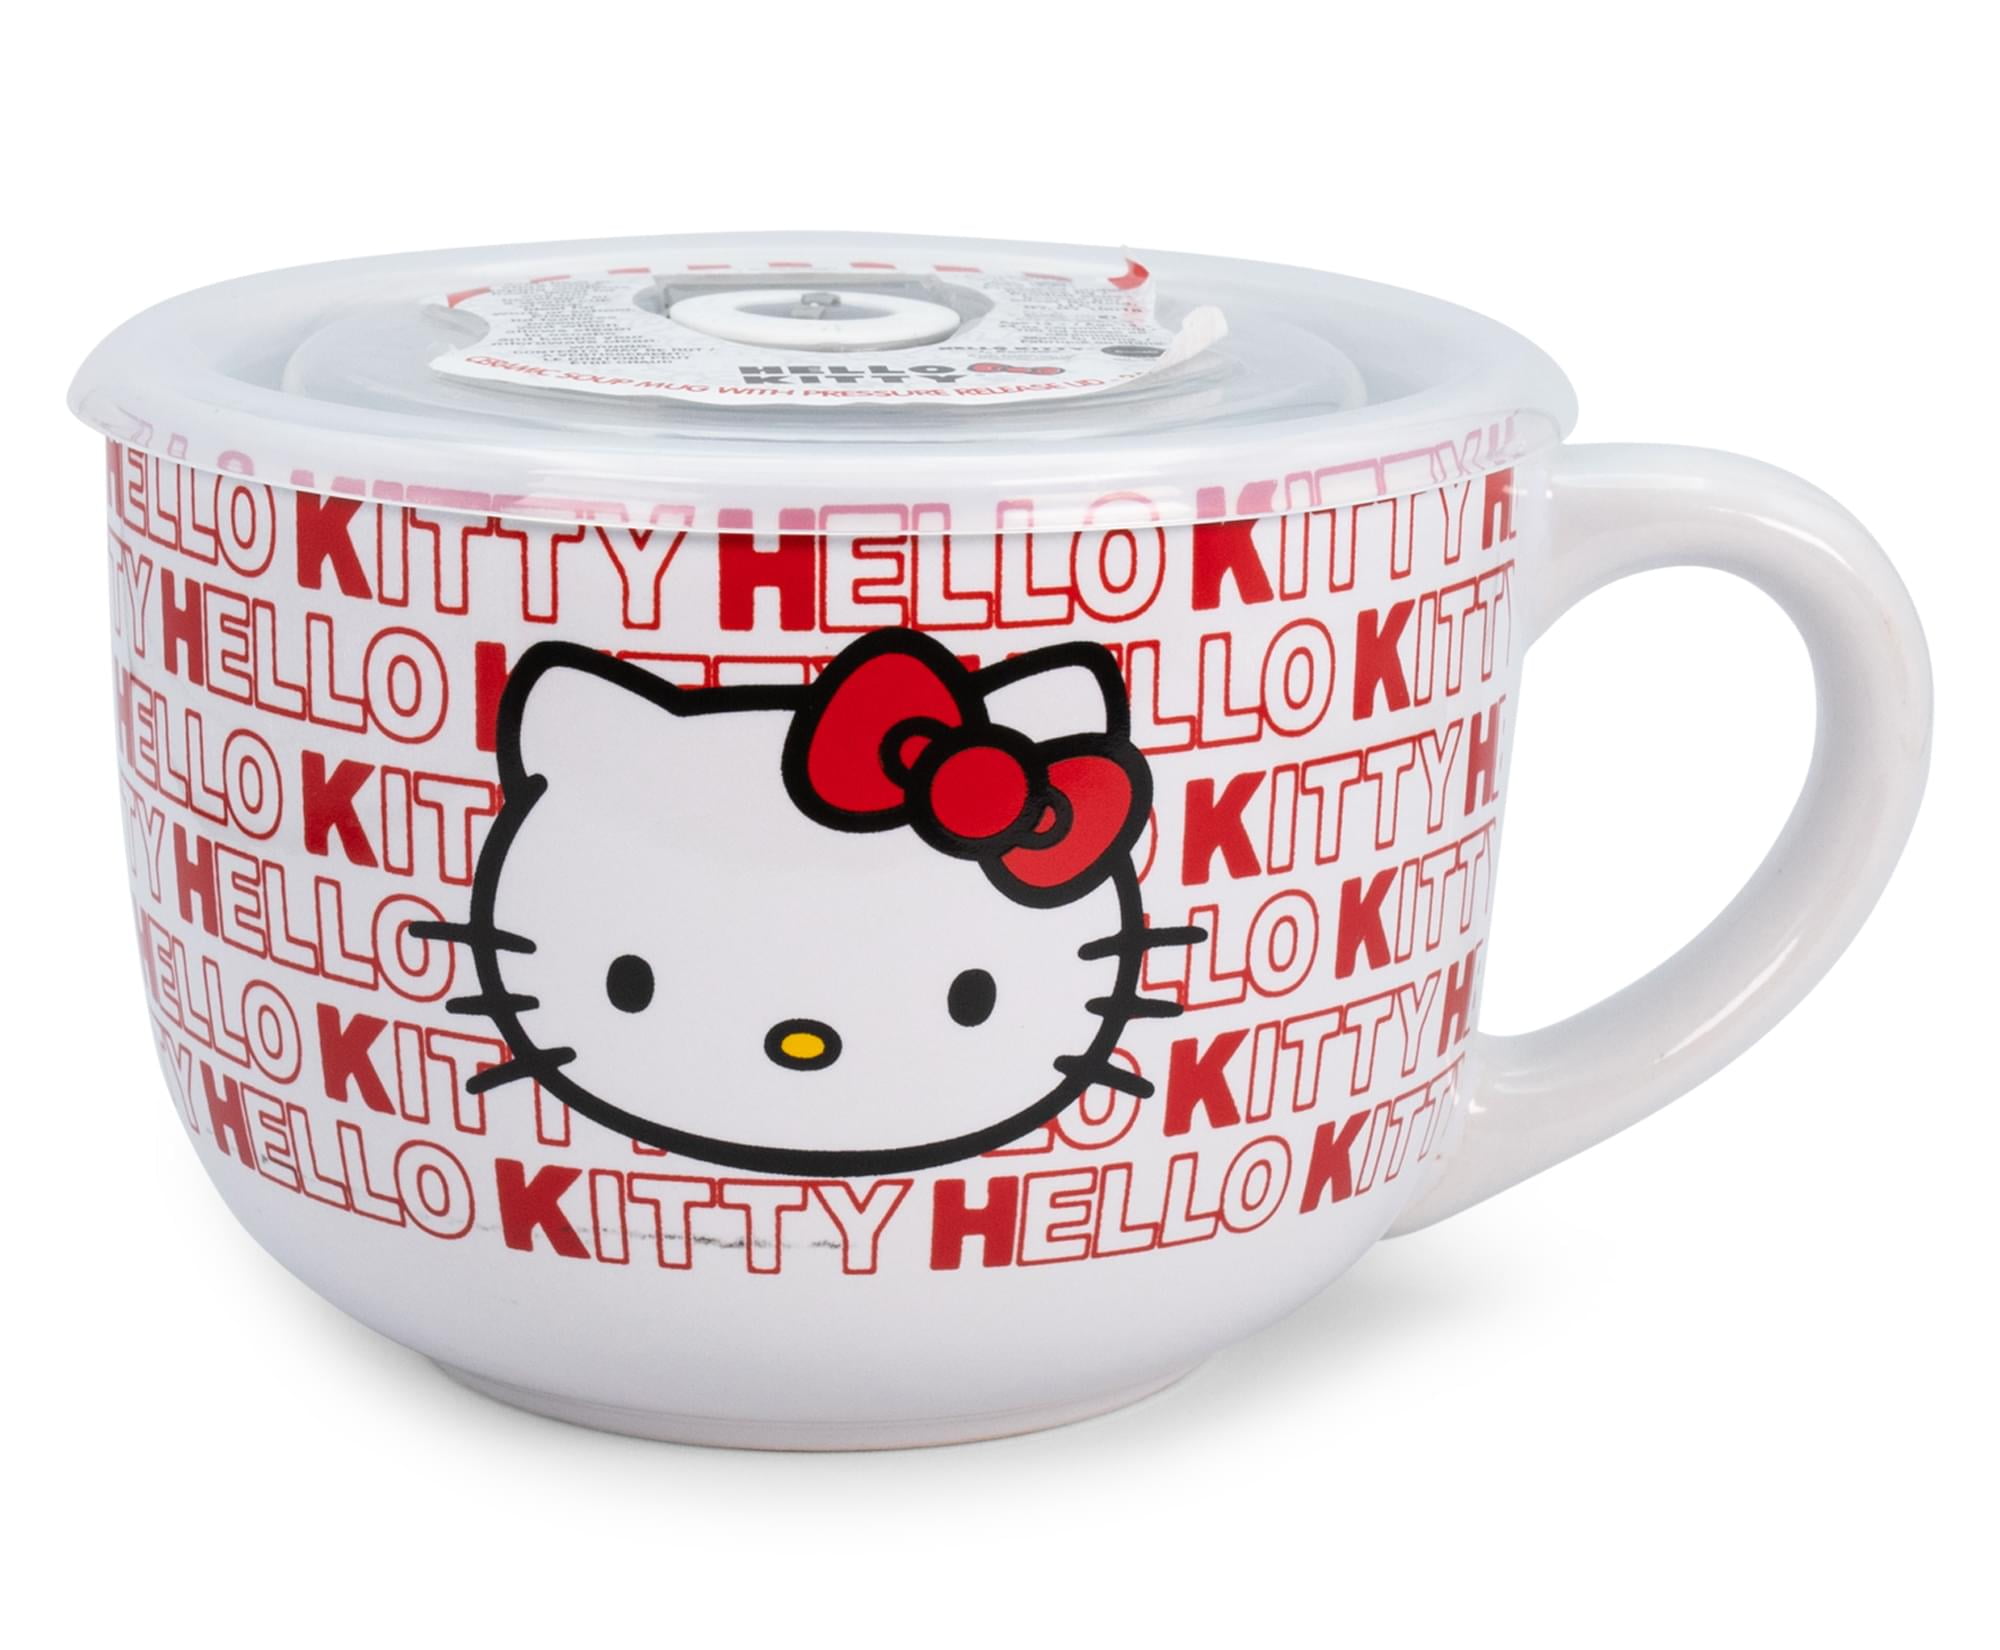 Sanrio Hello Kitty Soup Cup 14 × 4 × 10.5 cm 230ml with handles Microwave OK Dinnerware Saucers Kitchen Blue